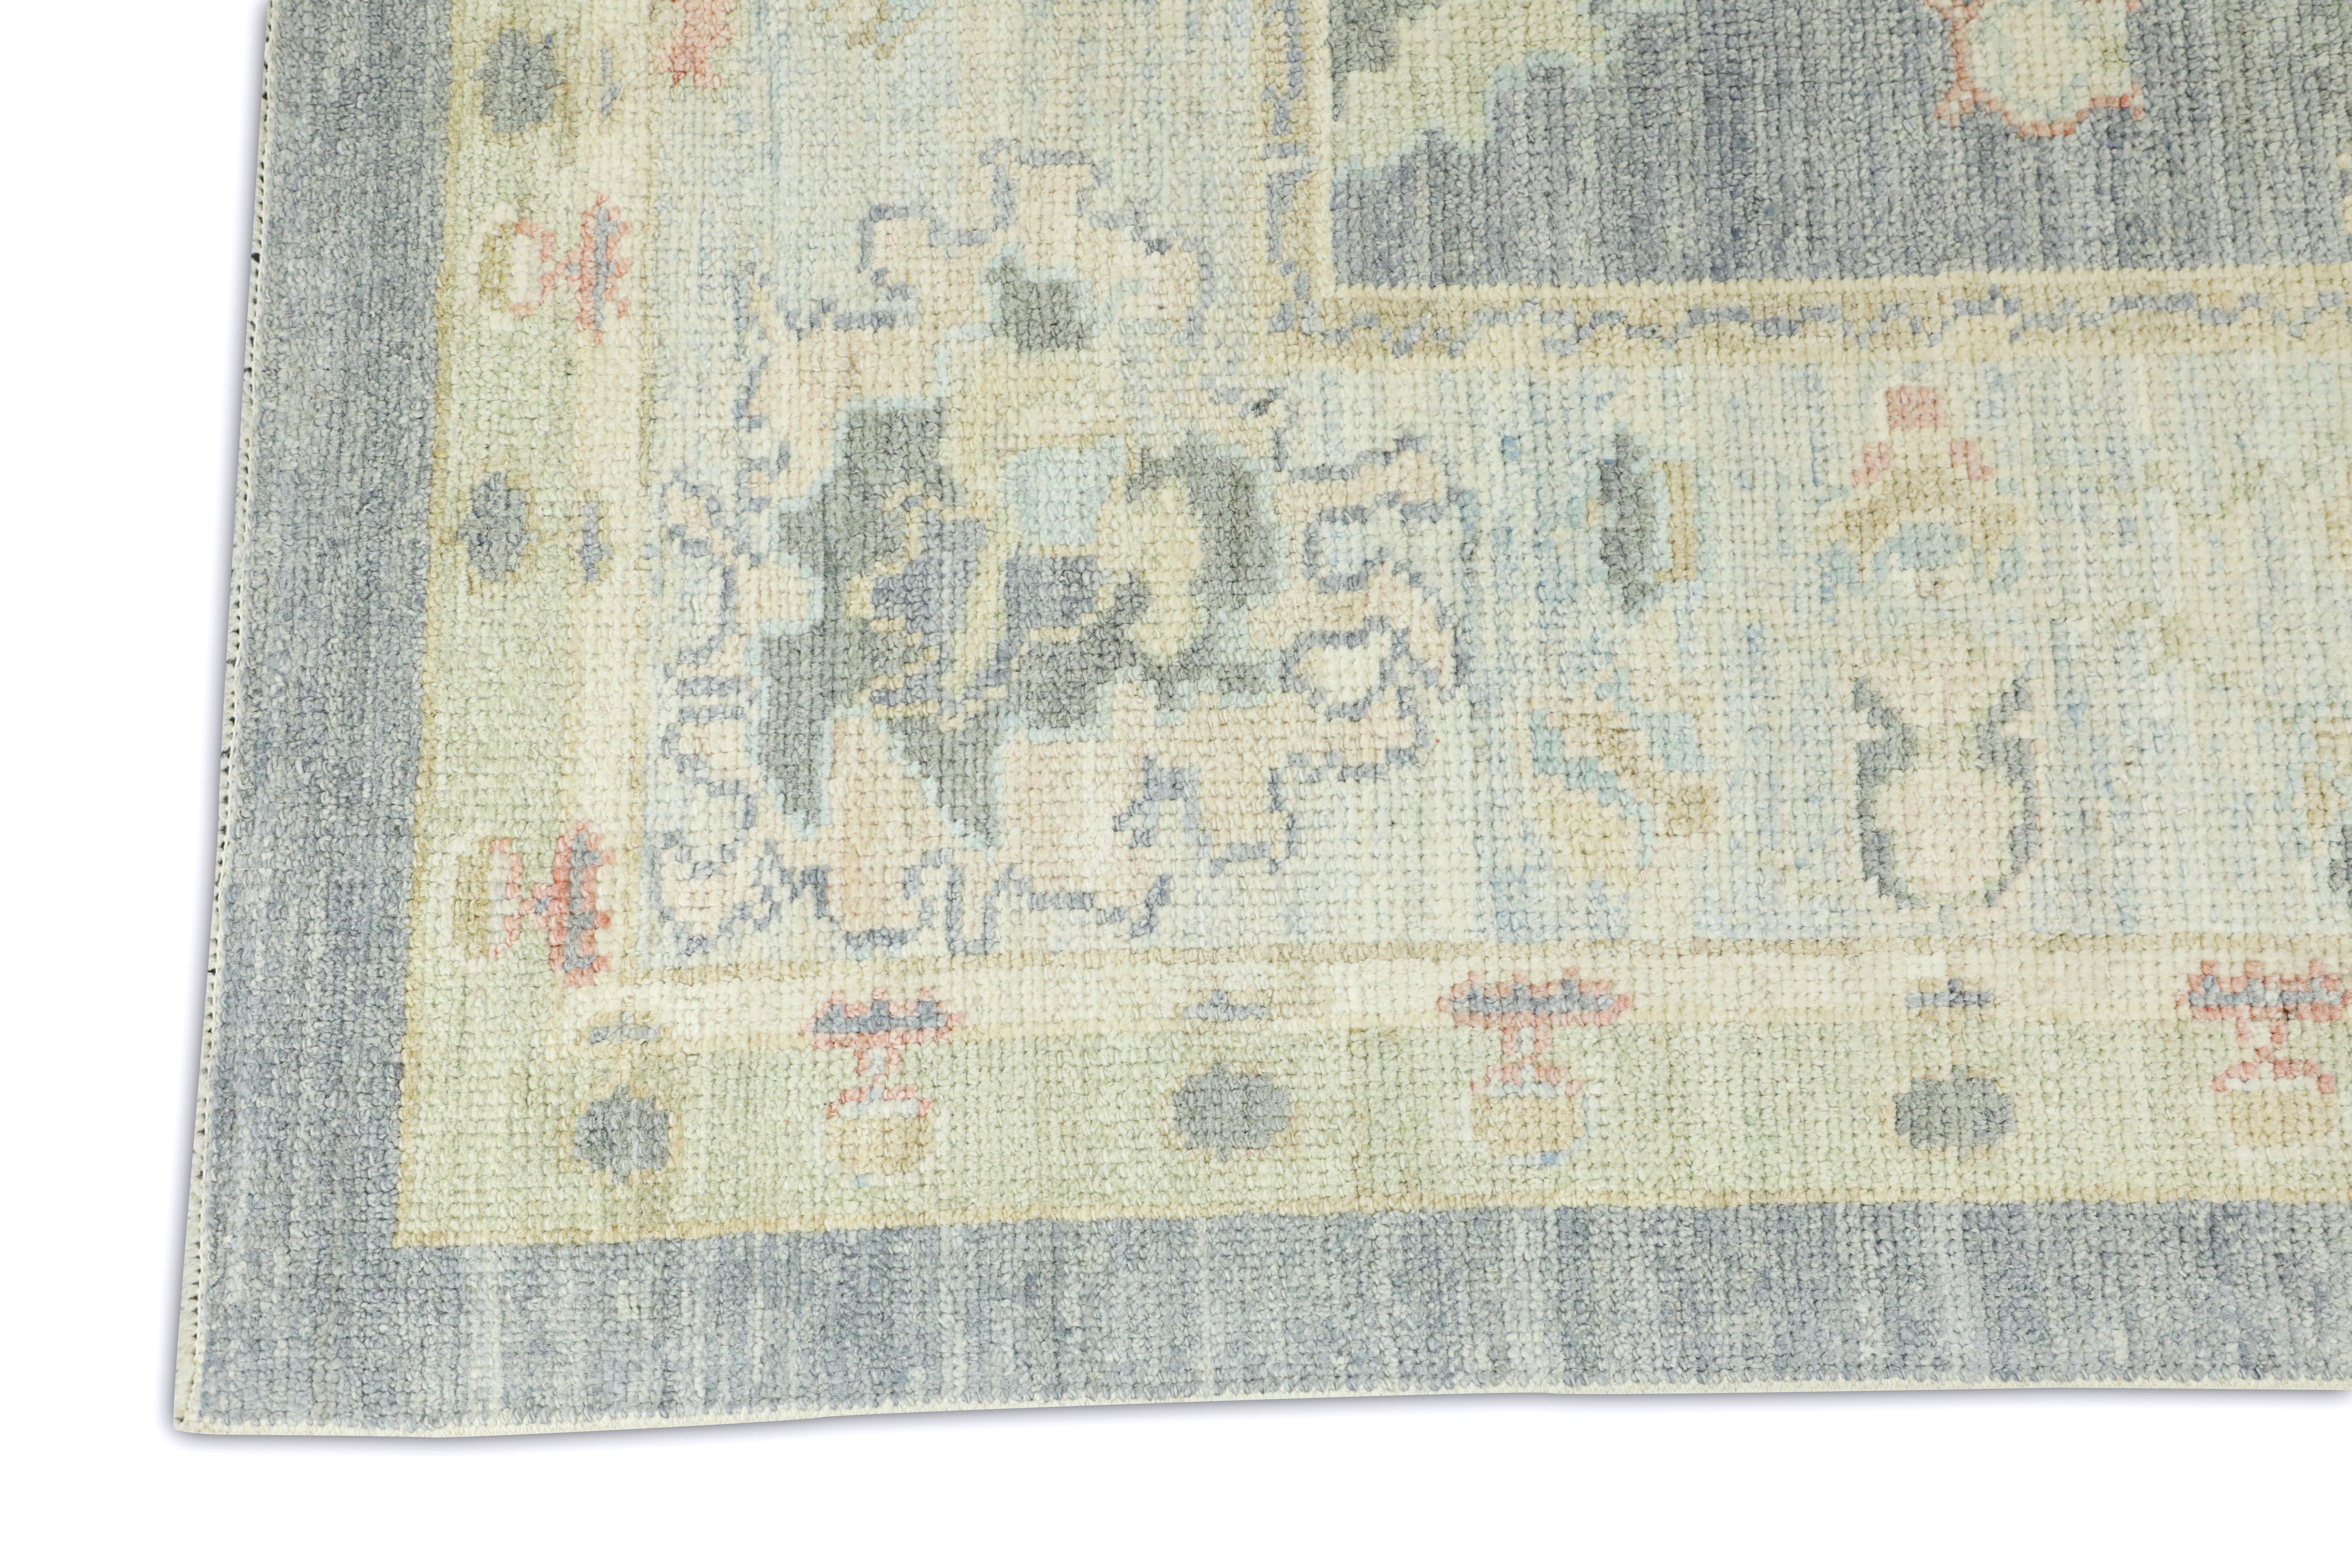 Hand Knotted Oriental Wool Turkish Oushak Rug 7'1